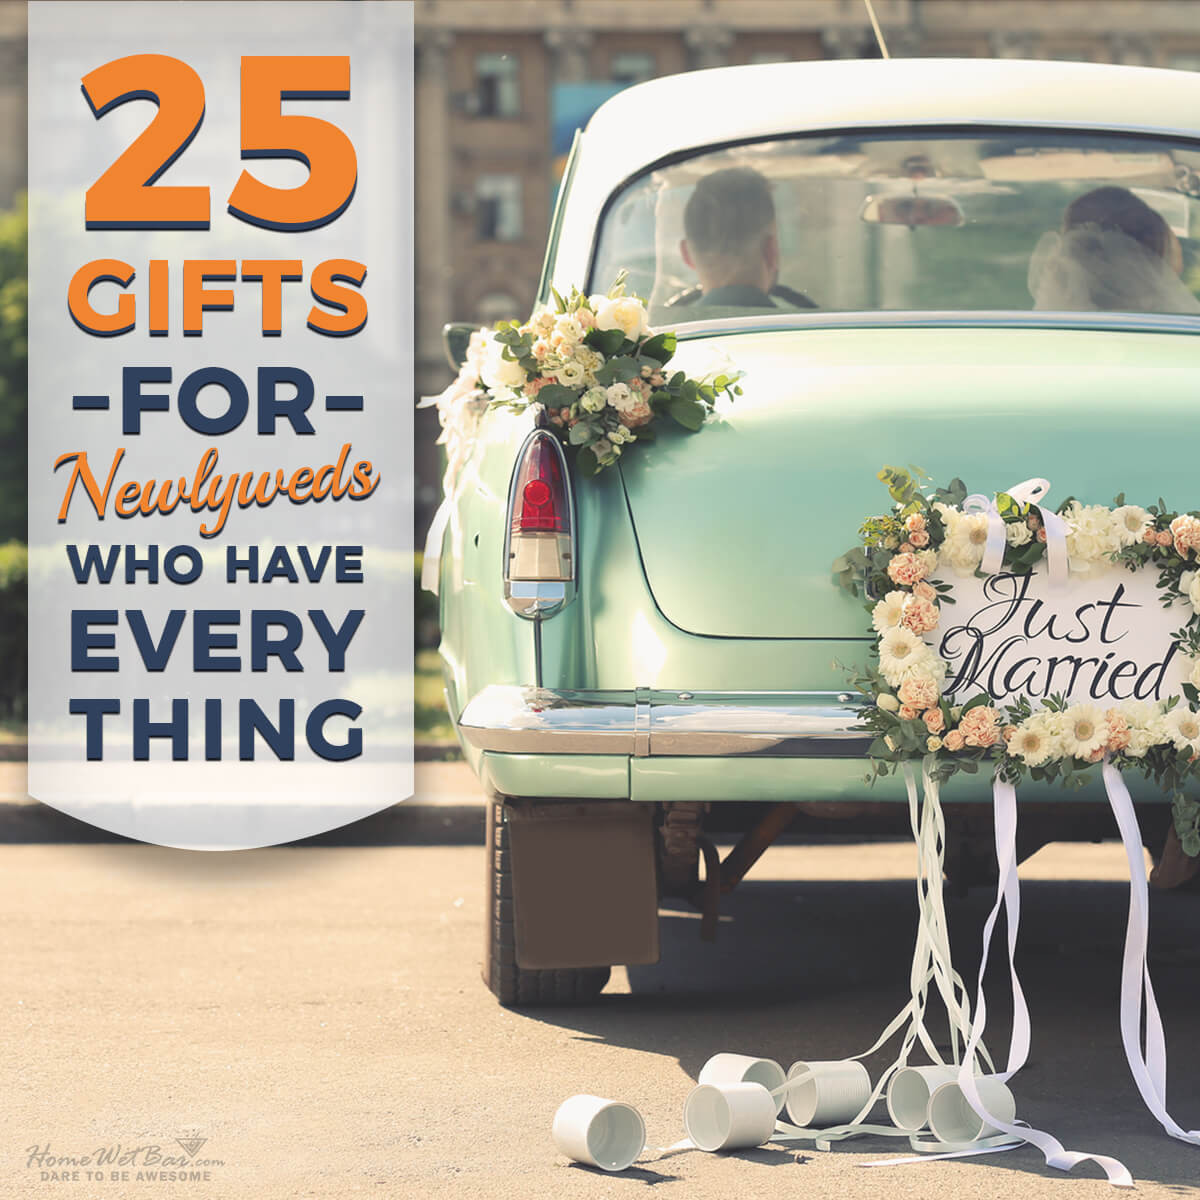 Christmas Gift Ideas For Older Couple
 25 Gifts for Newlyweds Who Have Everything